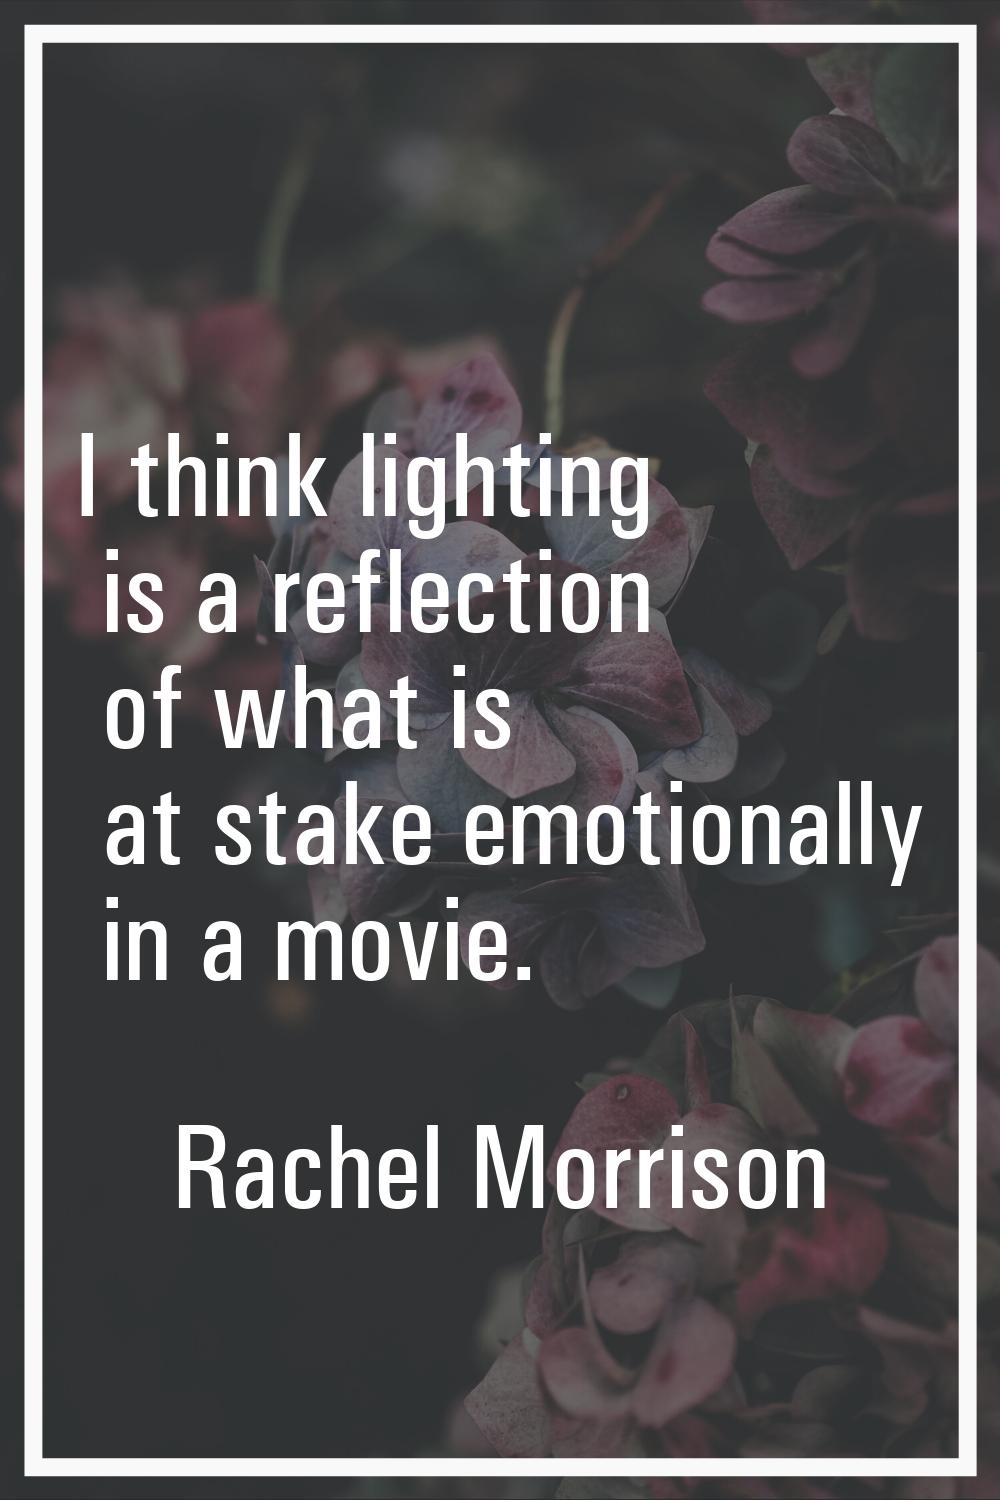 I think lighting is a reflection of what is at stake emotionally in a movie.